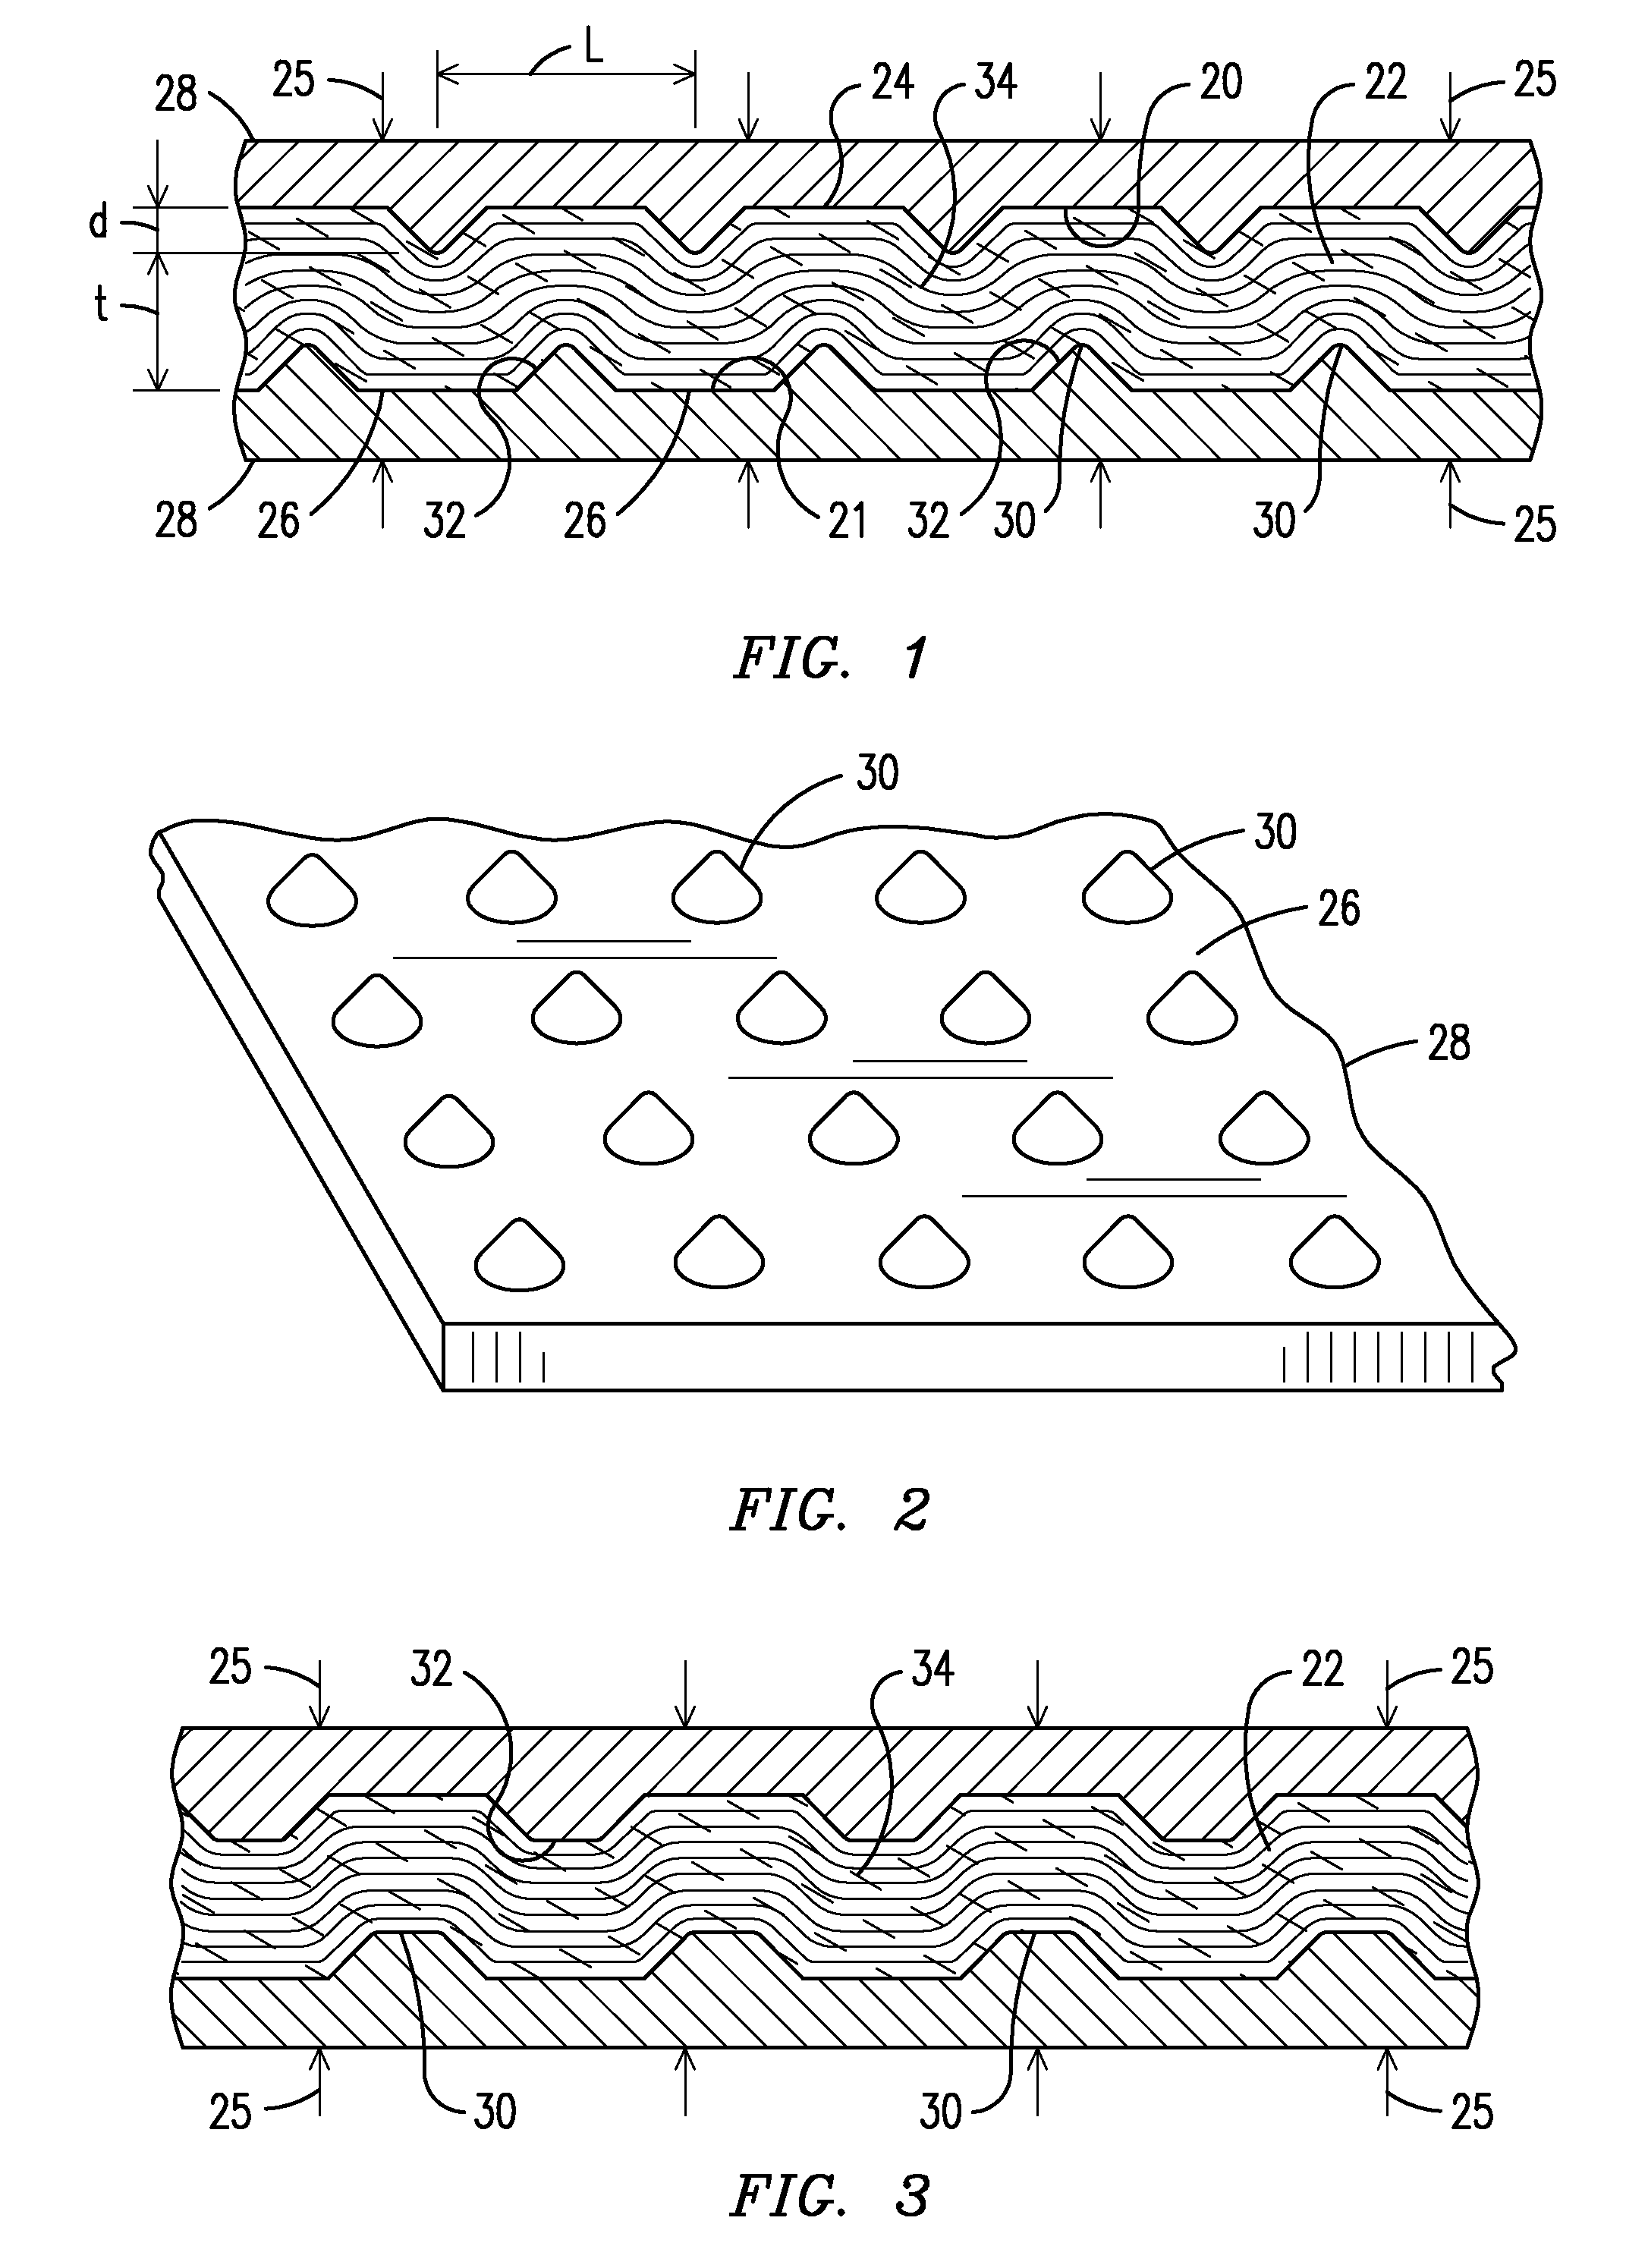 Methodology and tooling arrangements for increasing interlaminar shear strength in a ceramic matrix composite structure